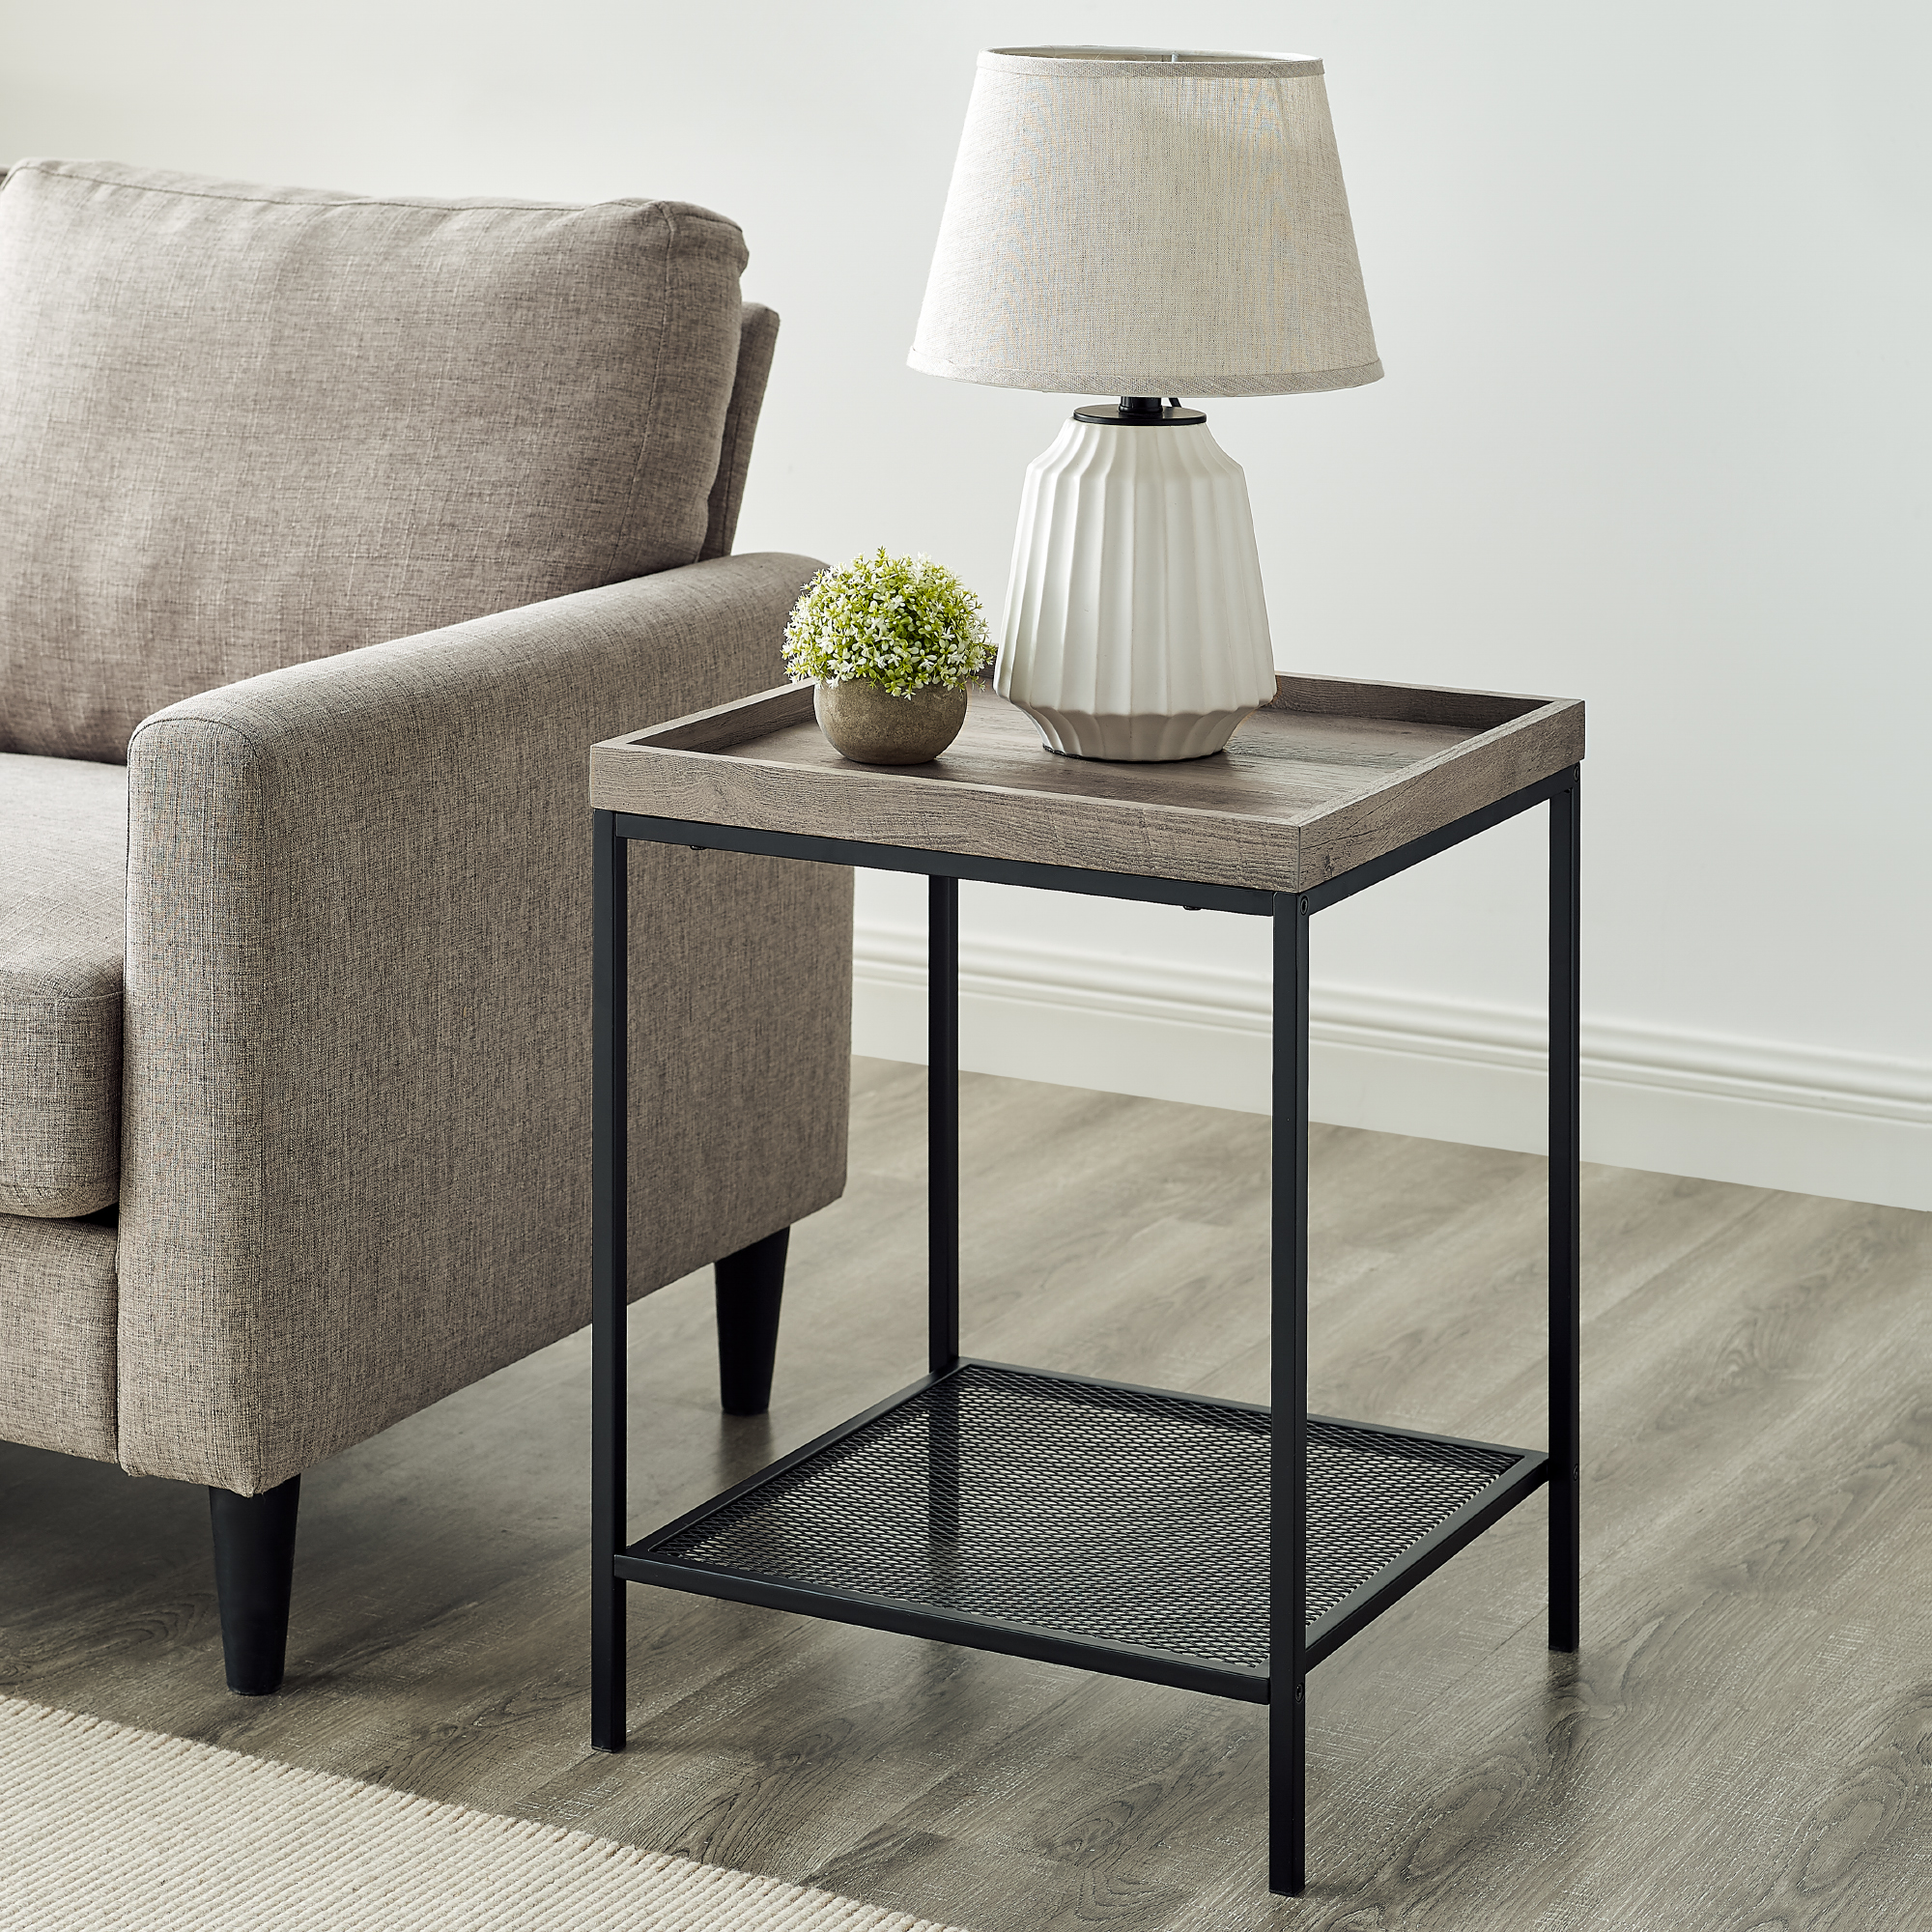 River Street Designs Frankie Metal and Wood Tray Top Grey Wash End Table - image 1 of 9